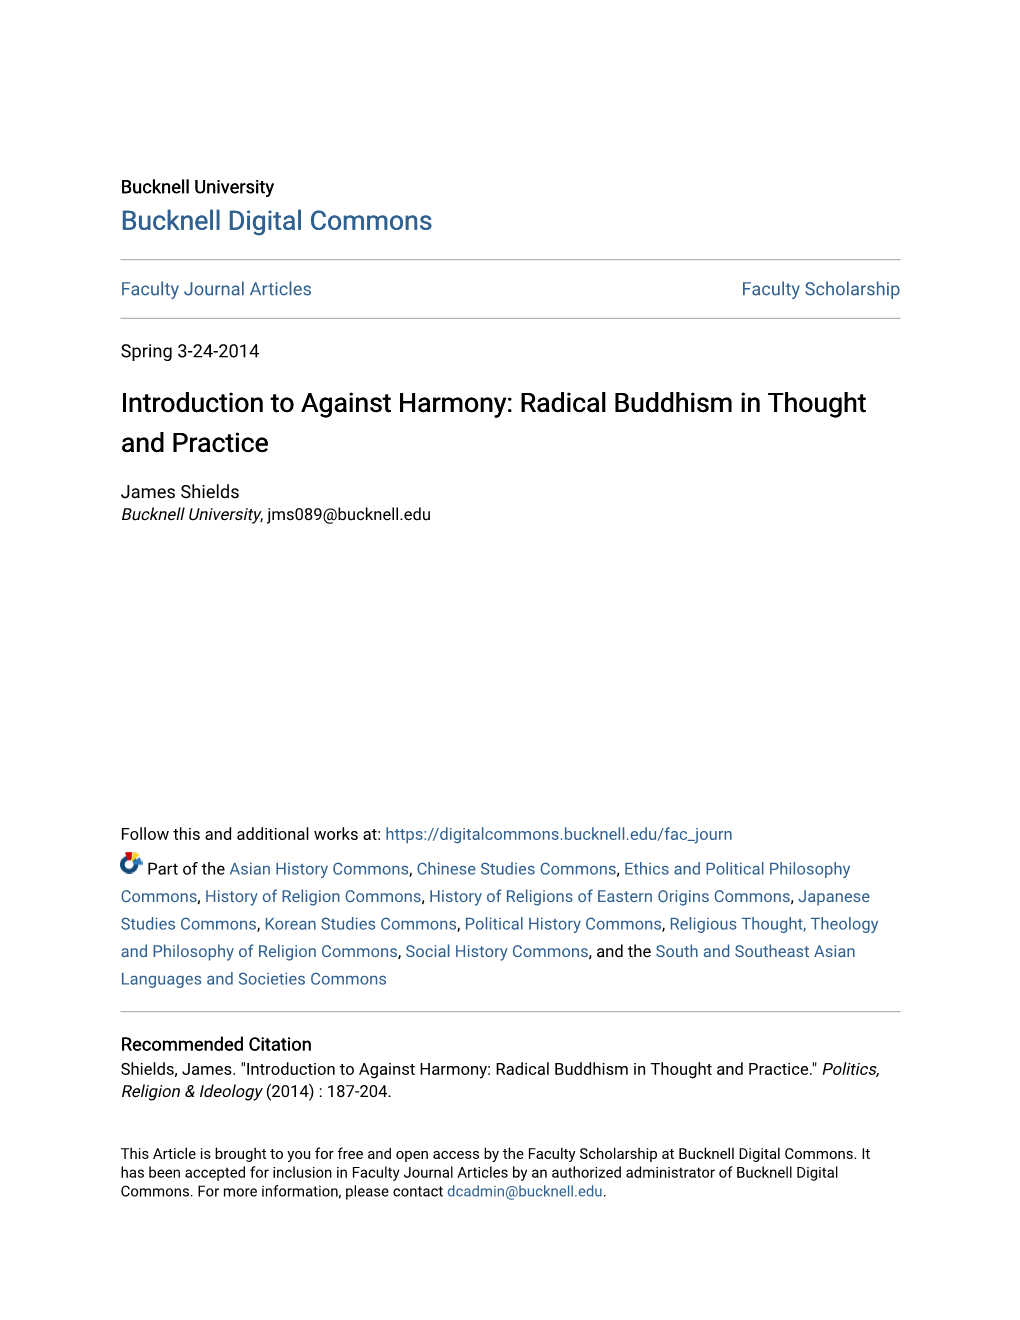 Introduction to Against Harmony: Radical Buddhism in Thought and Practice